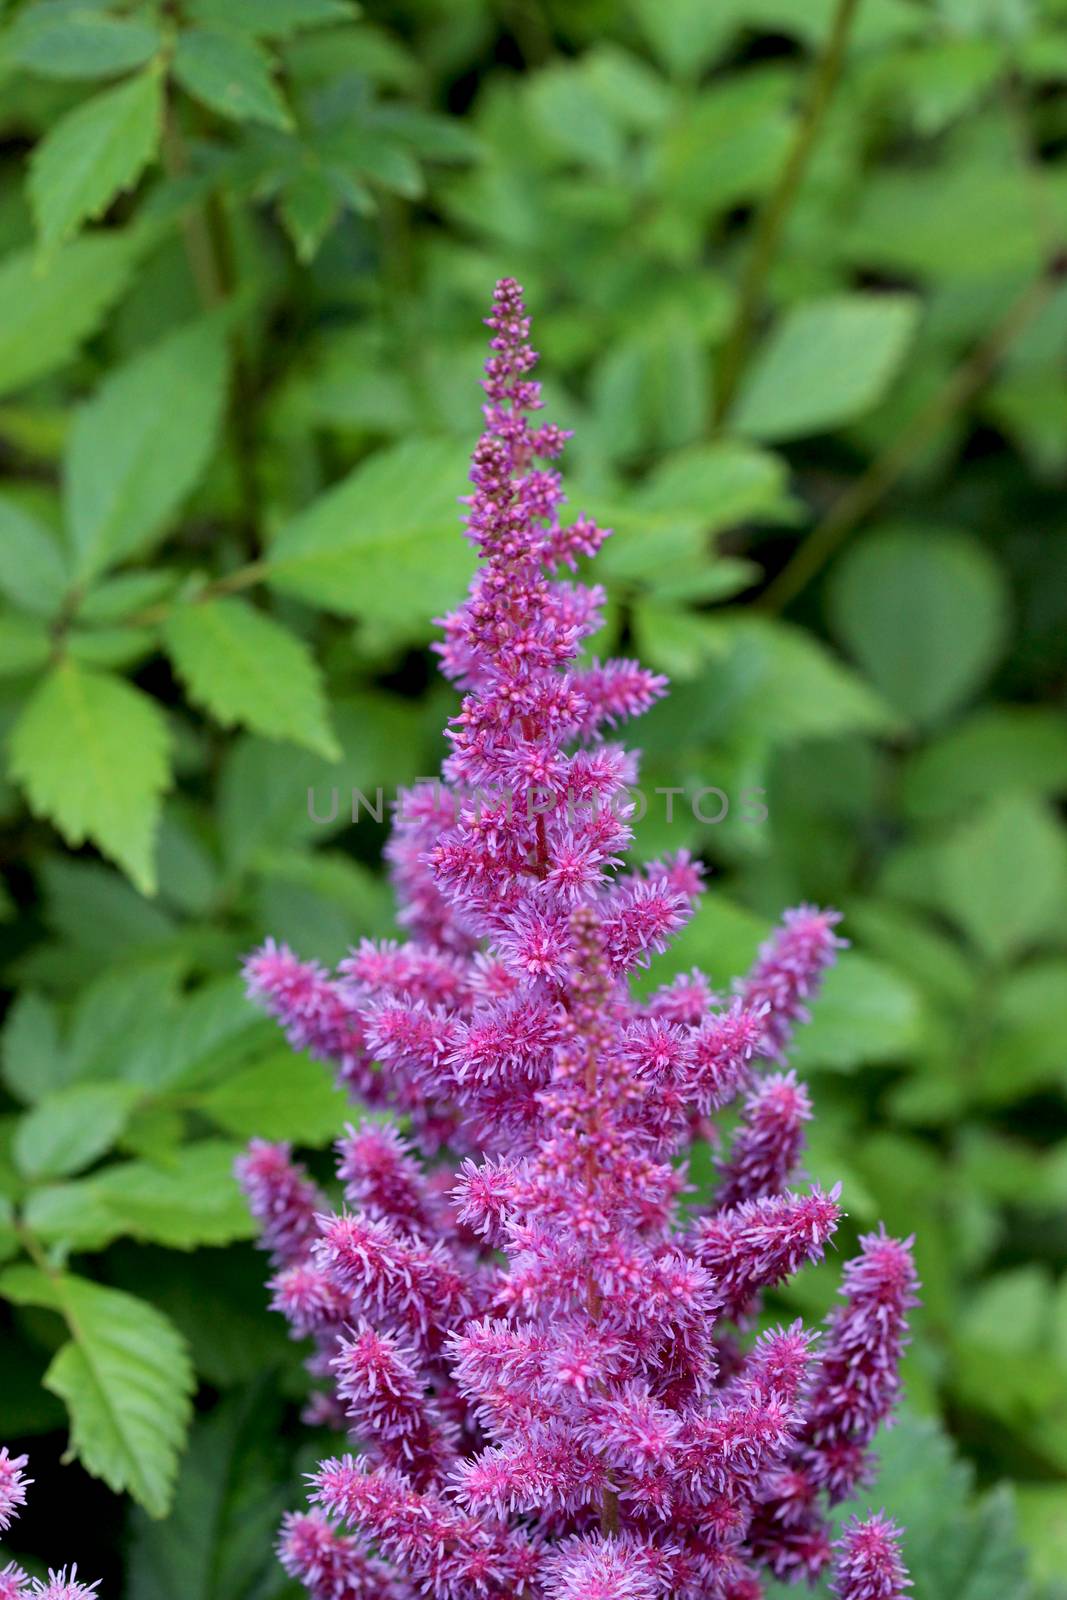 Astilbe is a genus of 18 species of rhizomatous flowering plants, within the family Saxifragaceae, native to mountain ravines and woodland in Asia and North America. Some species are commonly known as false goat's beard and false spirea. These hardy herbaceous perennials are cultivated by gardeners for their large, handsome, often fern-like foliage, and dense, feathery plumes of flowers.